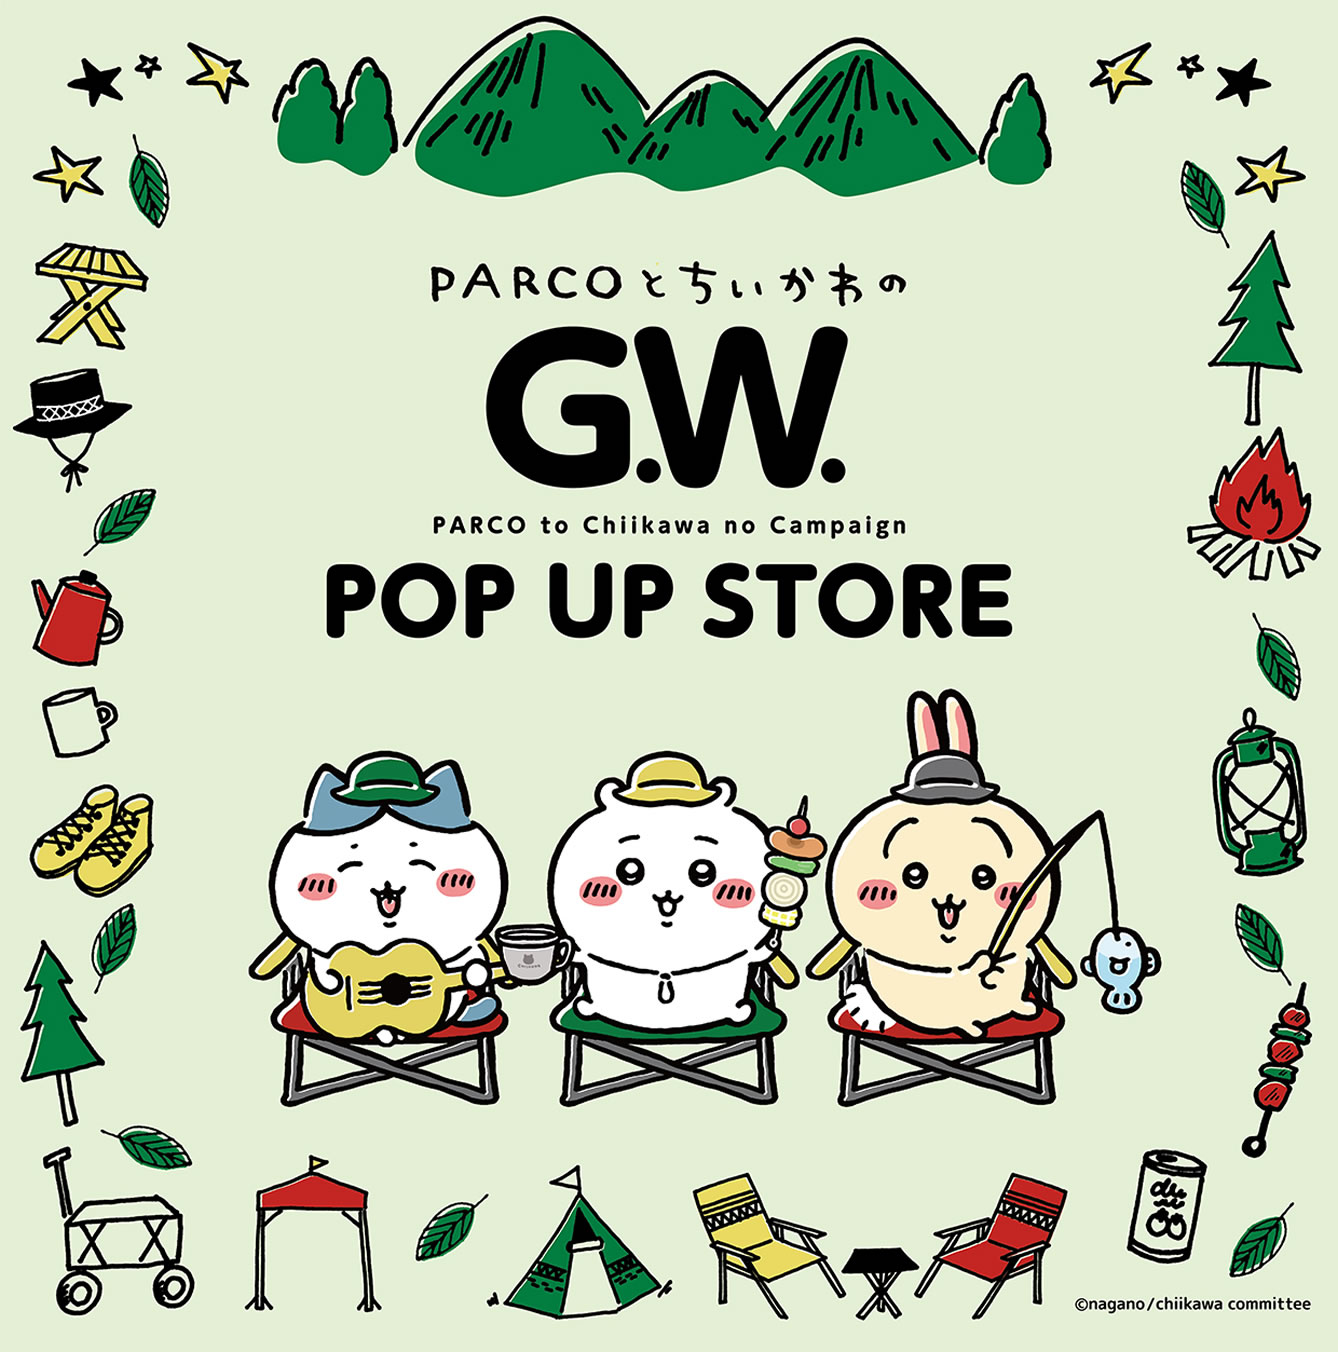 PARCOとちいかわのG.W. PARCO to Chiikawa no Campaign POP UP STORE